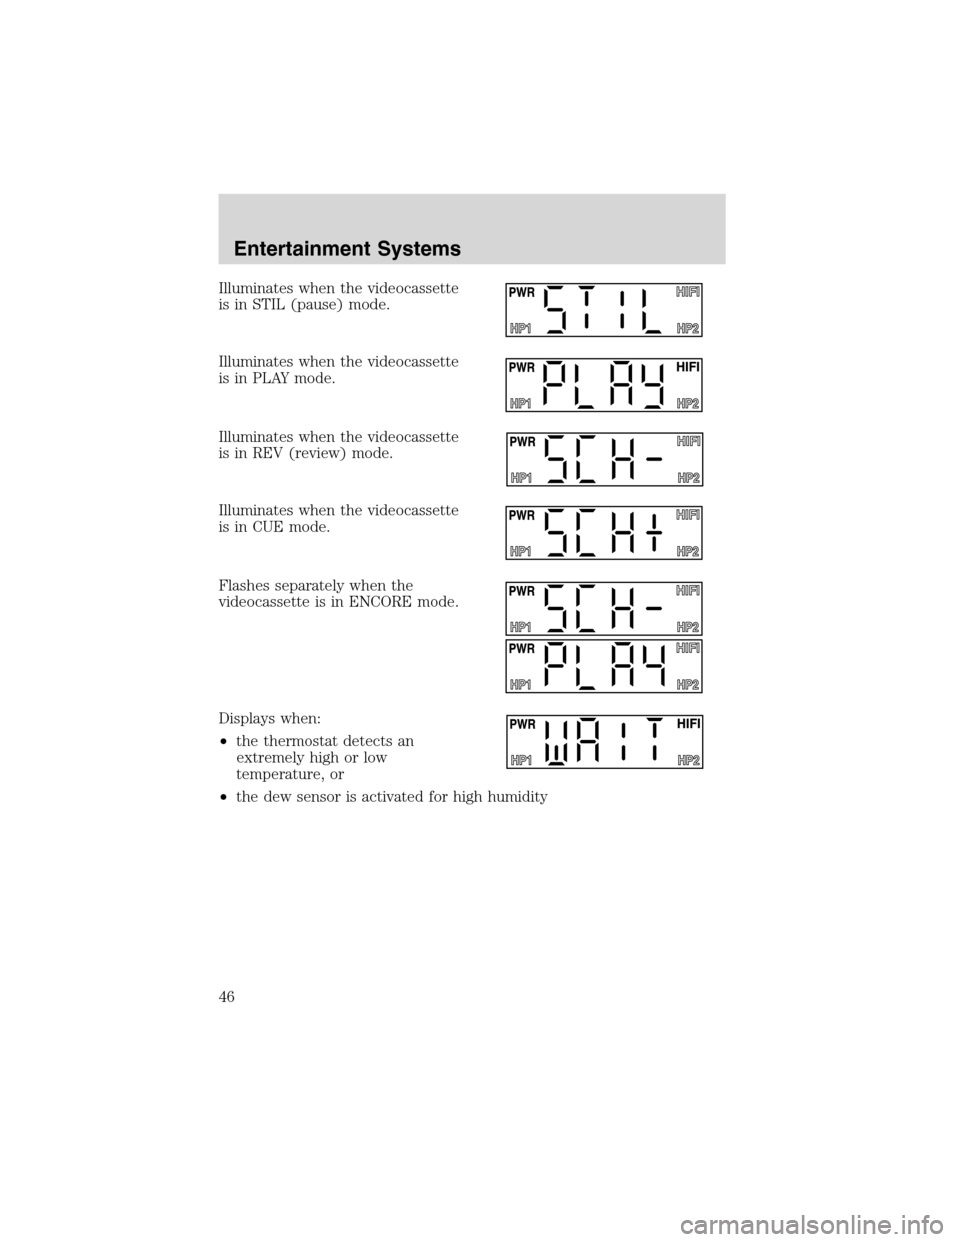 FORD E SERIES 2003 4.G Service Manual Illuminates when the videocassette
is in STIL (pause) mode.
Illuminates when the videocassette
is in PLAY mode.
Illuminates when the videocassette
is in REV (review) mode.
Illuminates when the videoca